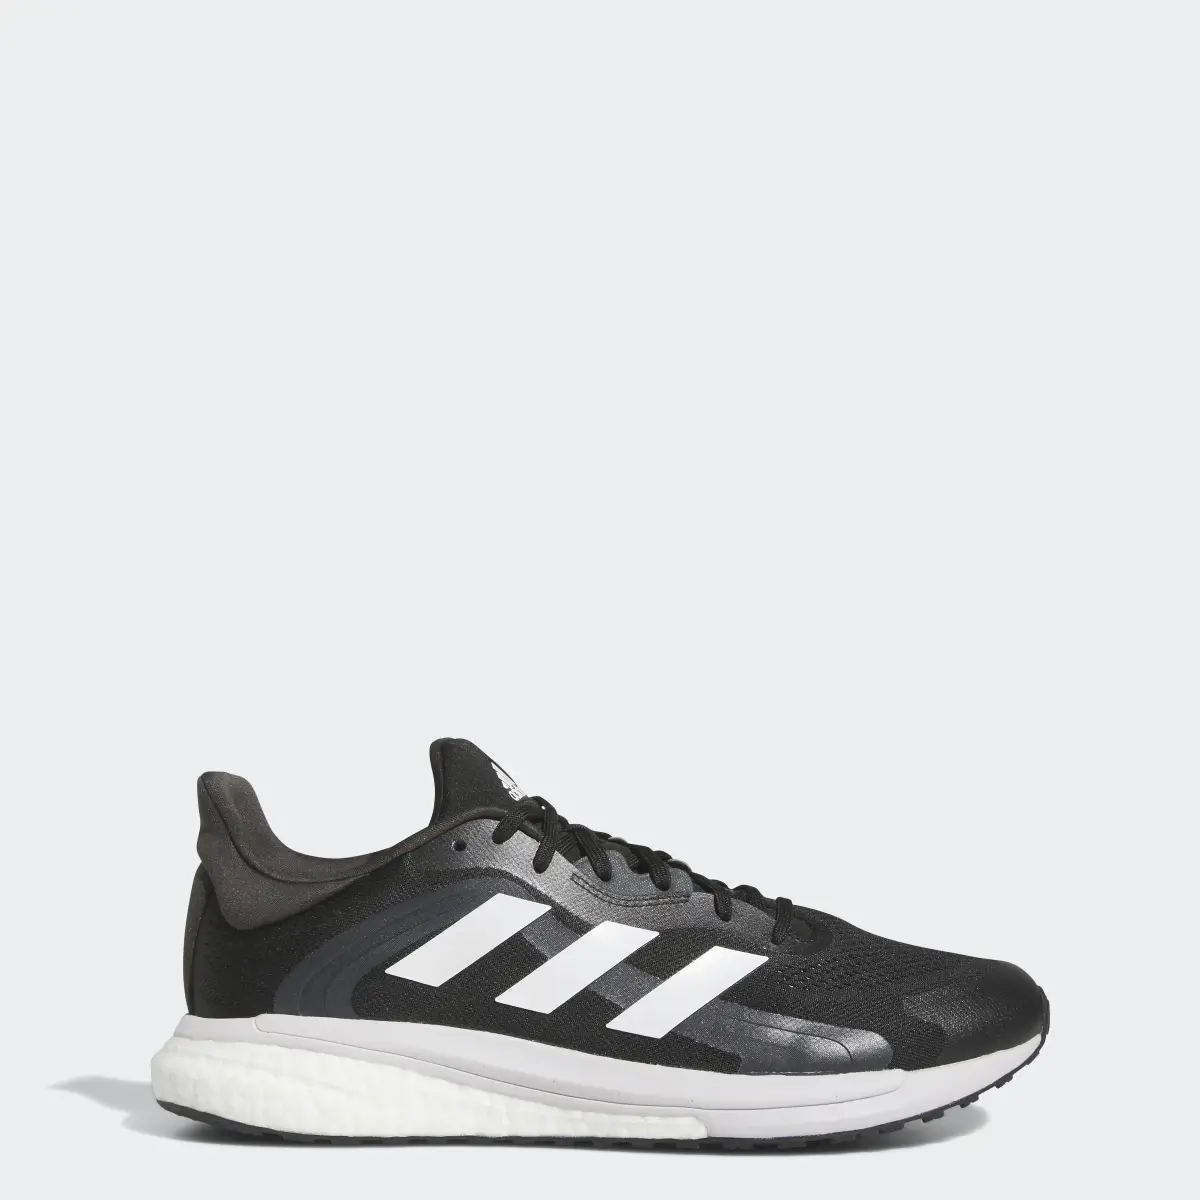 Adidas SolarGlide 4 ST Shoes. 1